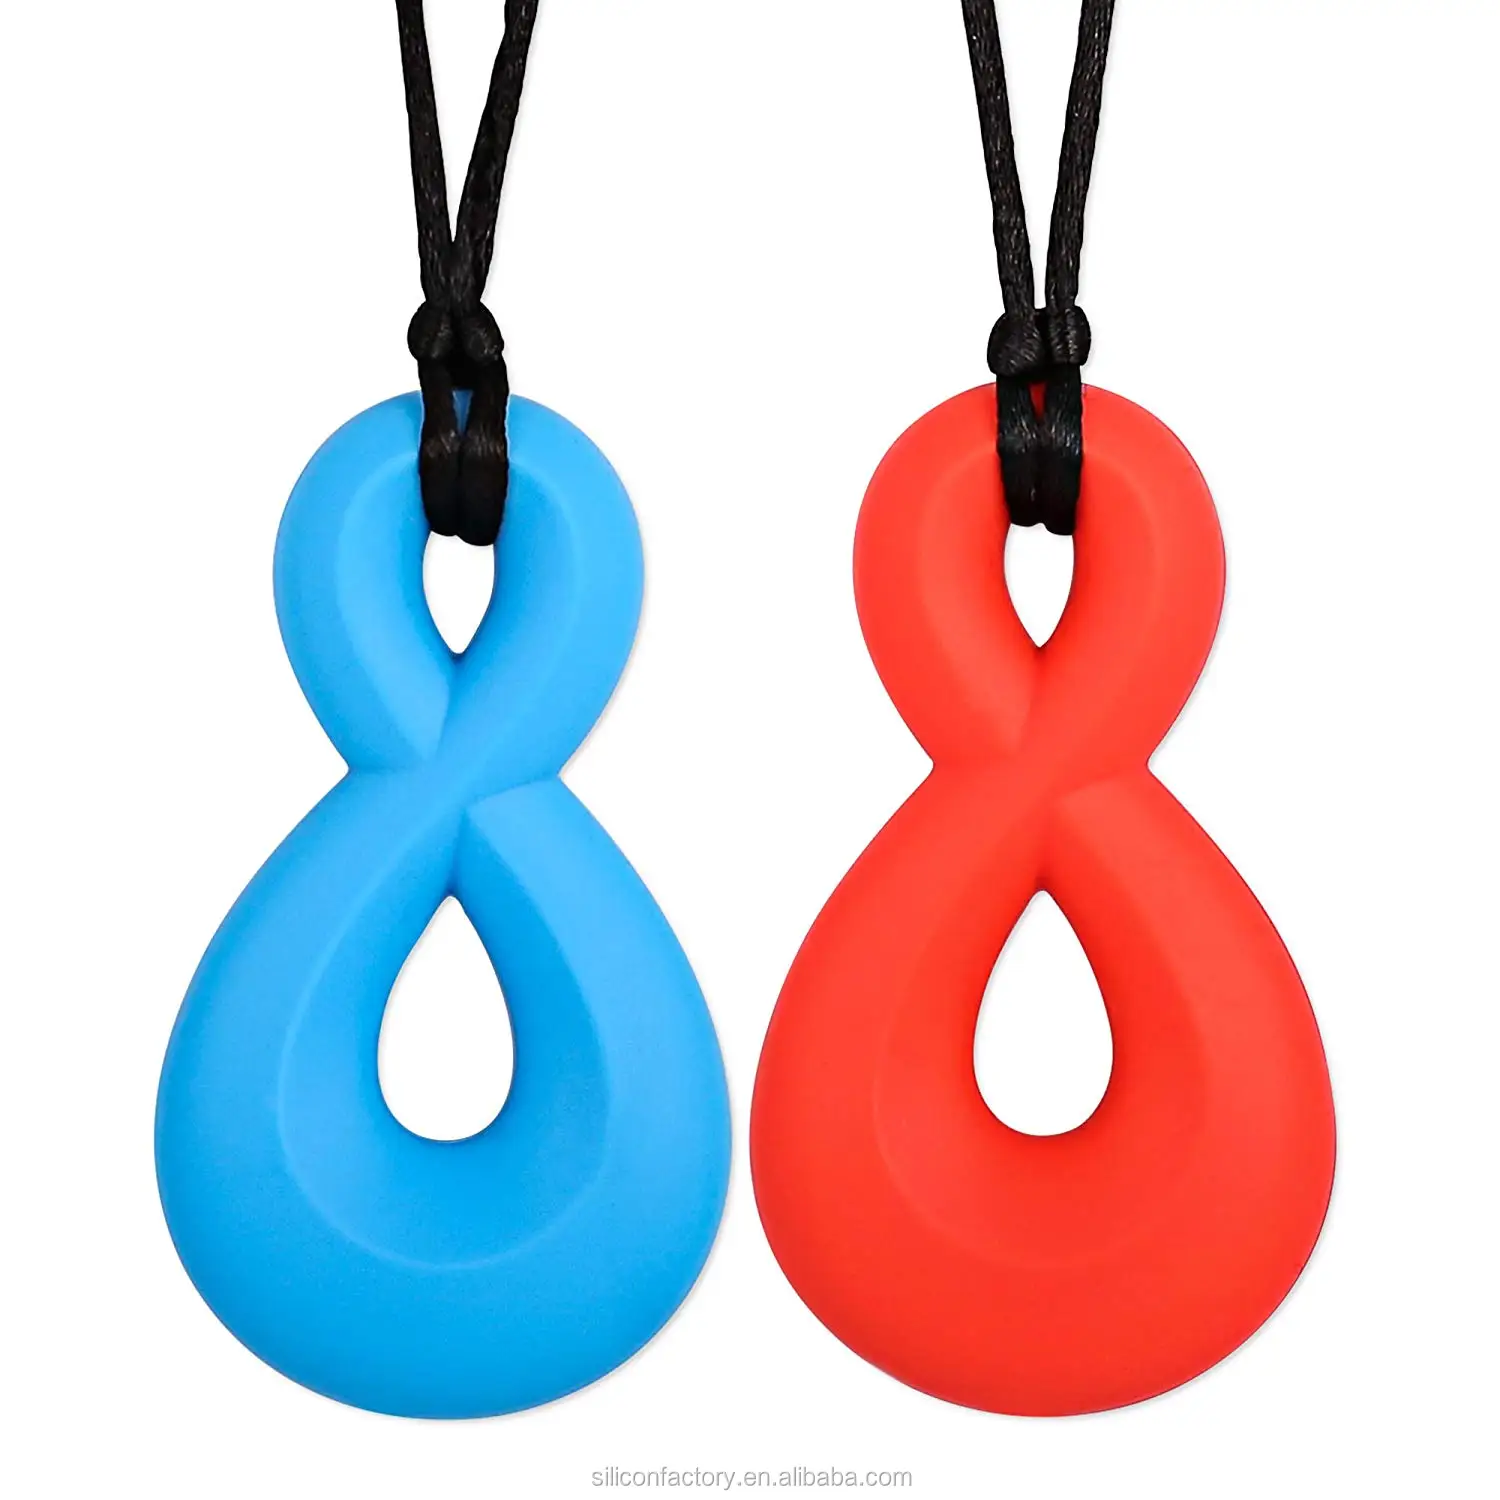 Silicone Sensory Chew Necklace for Boys & Girls Chewlery Kids ADHD Biting 